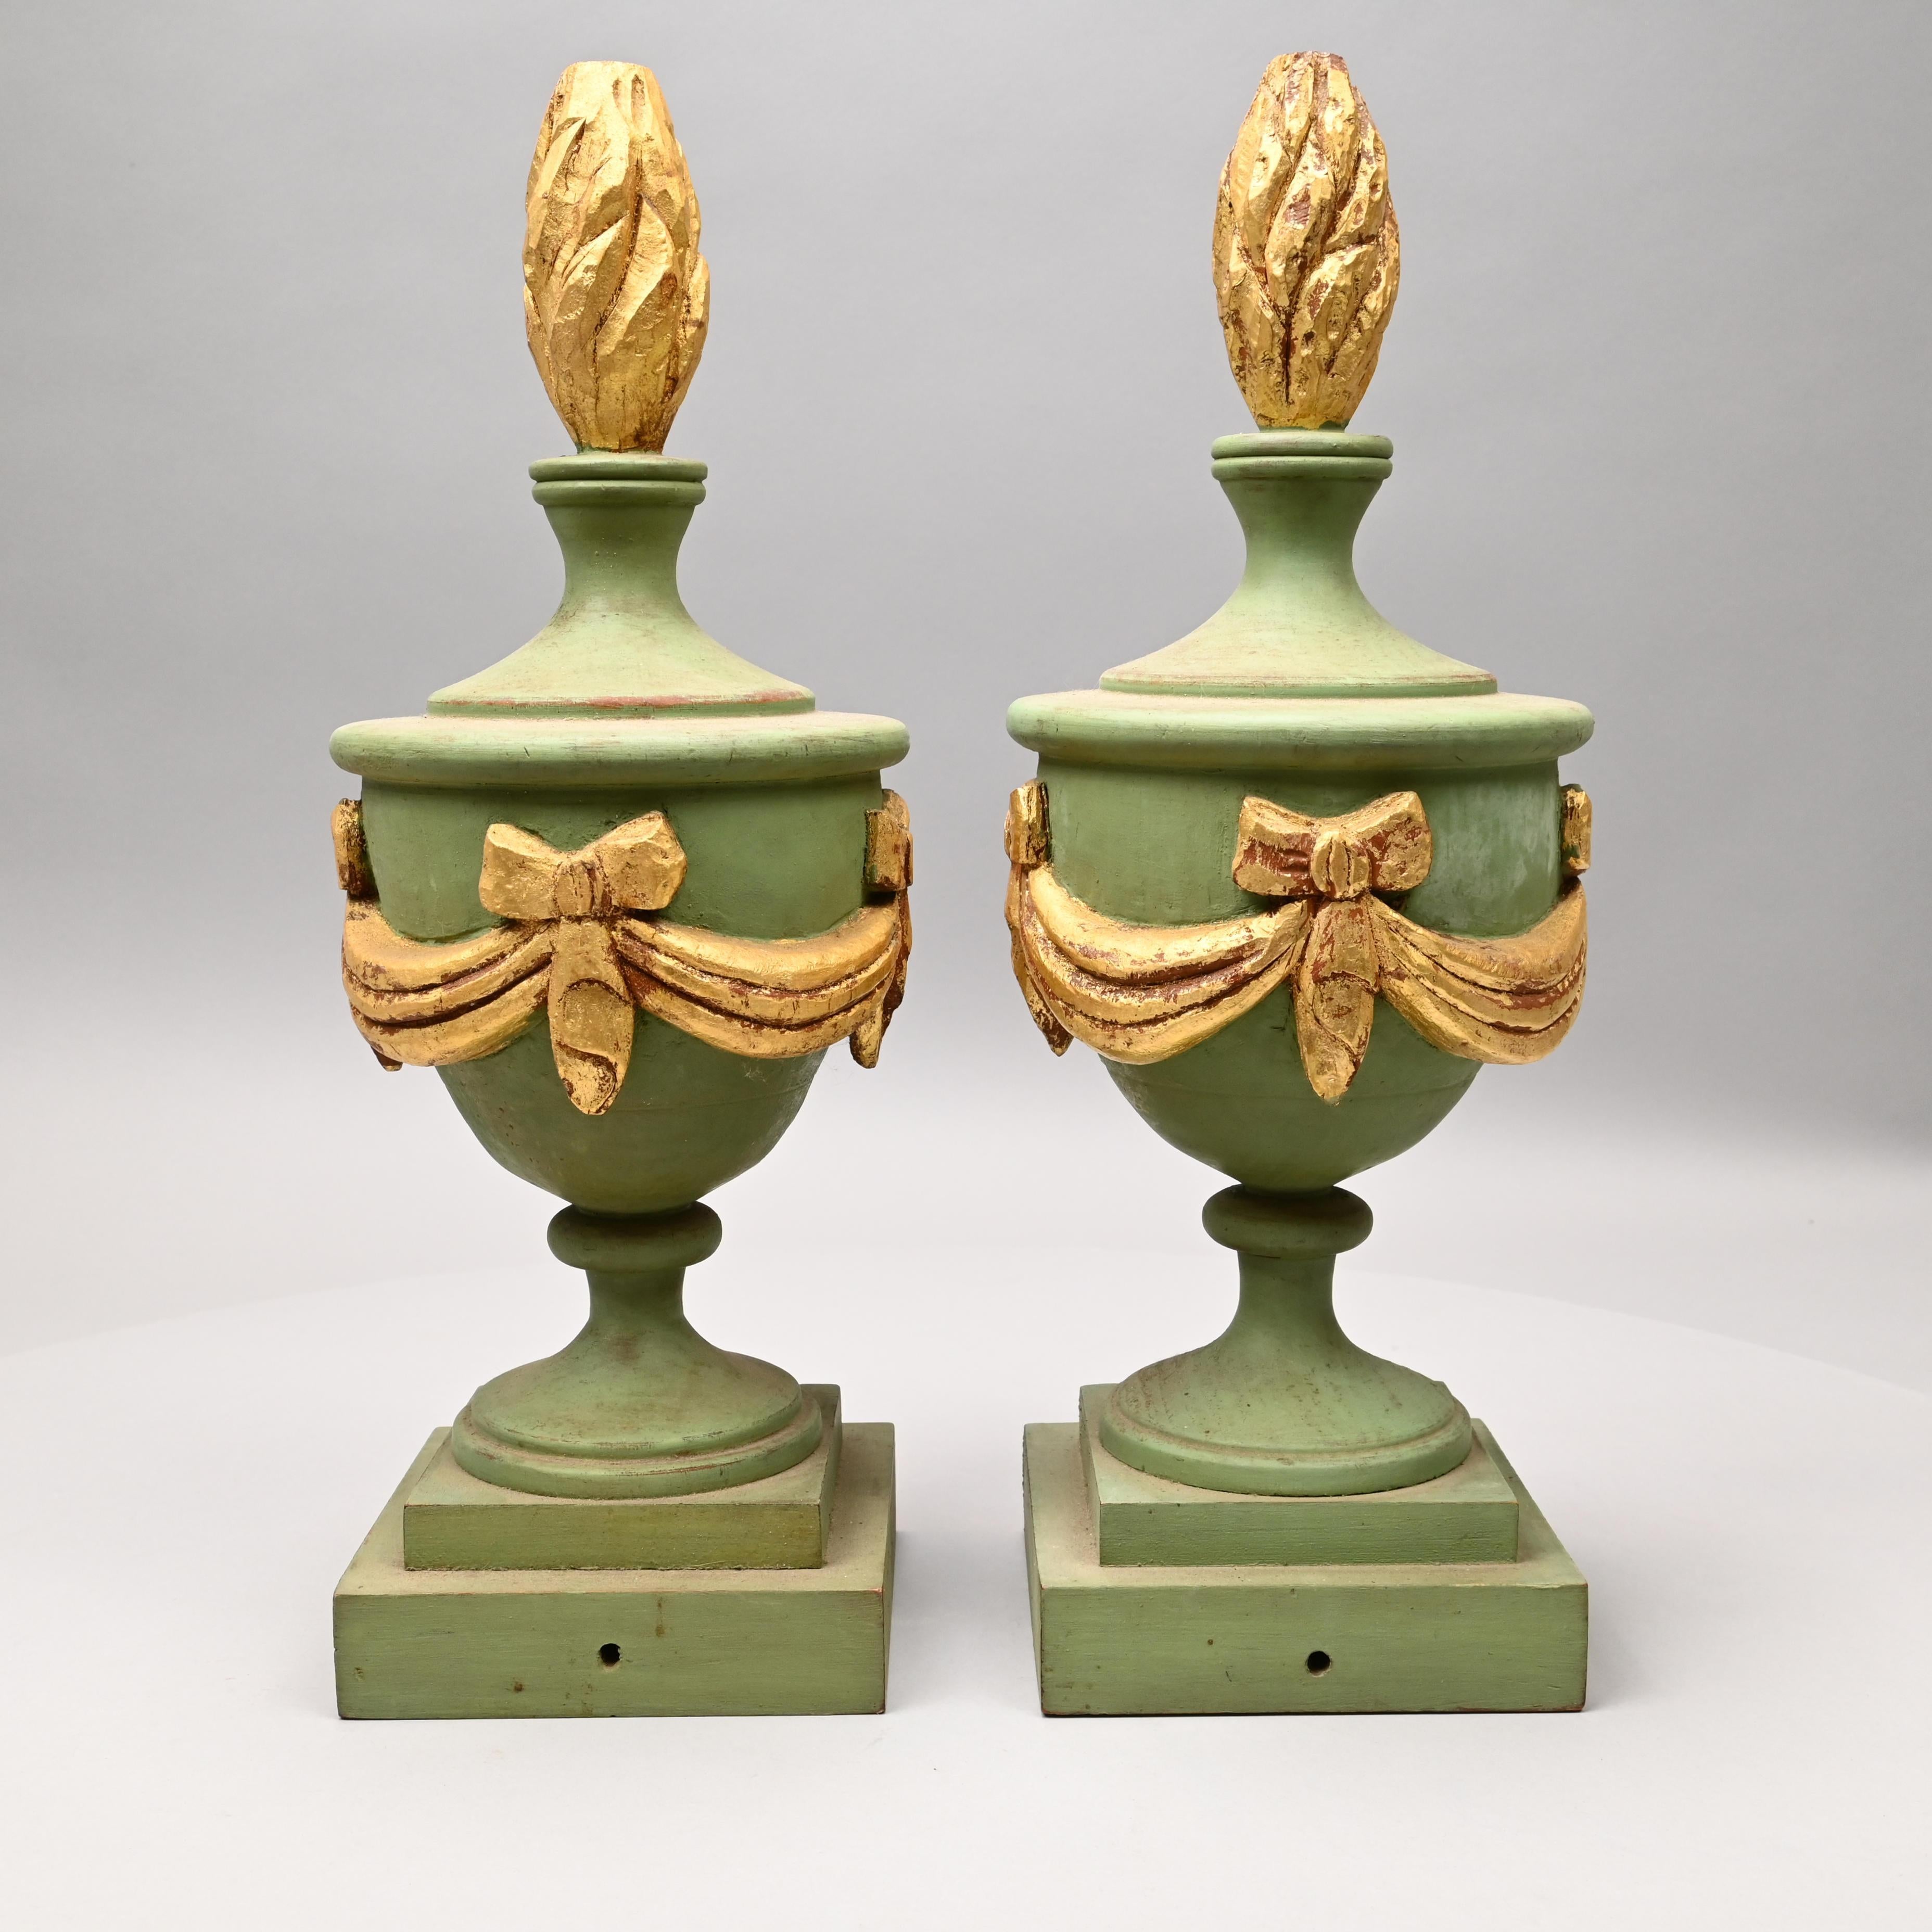 Decorative Pair of Wooden Light Green and Gold painted Architectural finials

Anonymous
Probably ate 19th or early 20th century; American in the European style
Painted and gilded pine wood

Approximate size: 18 x 6 in. 

The present pair of